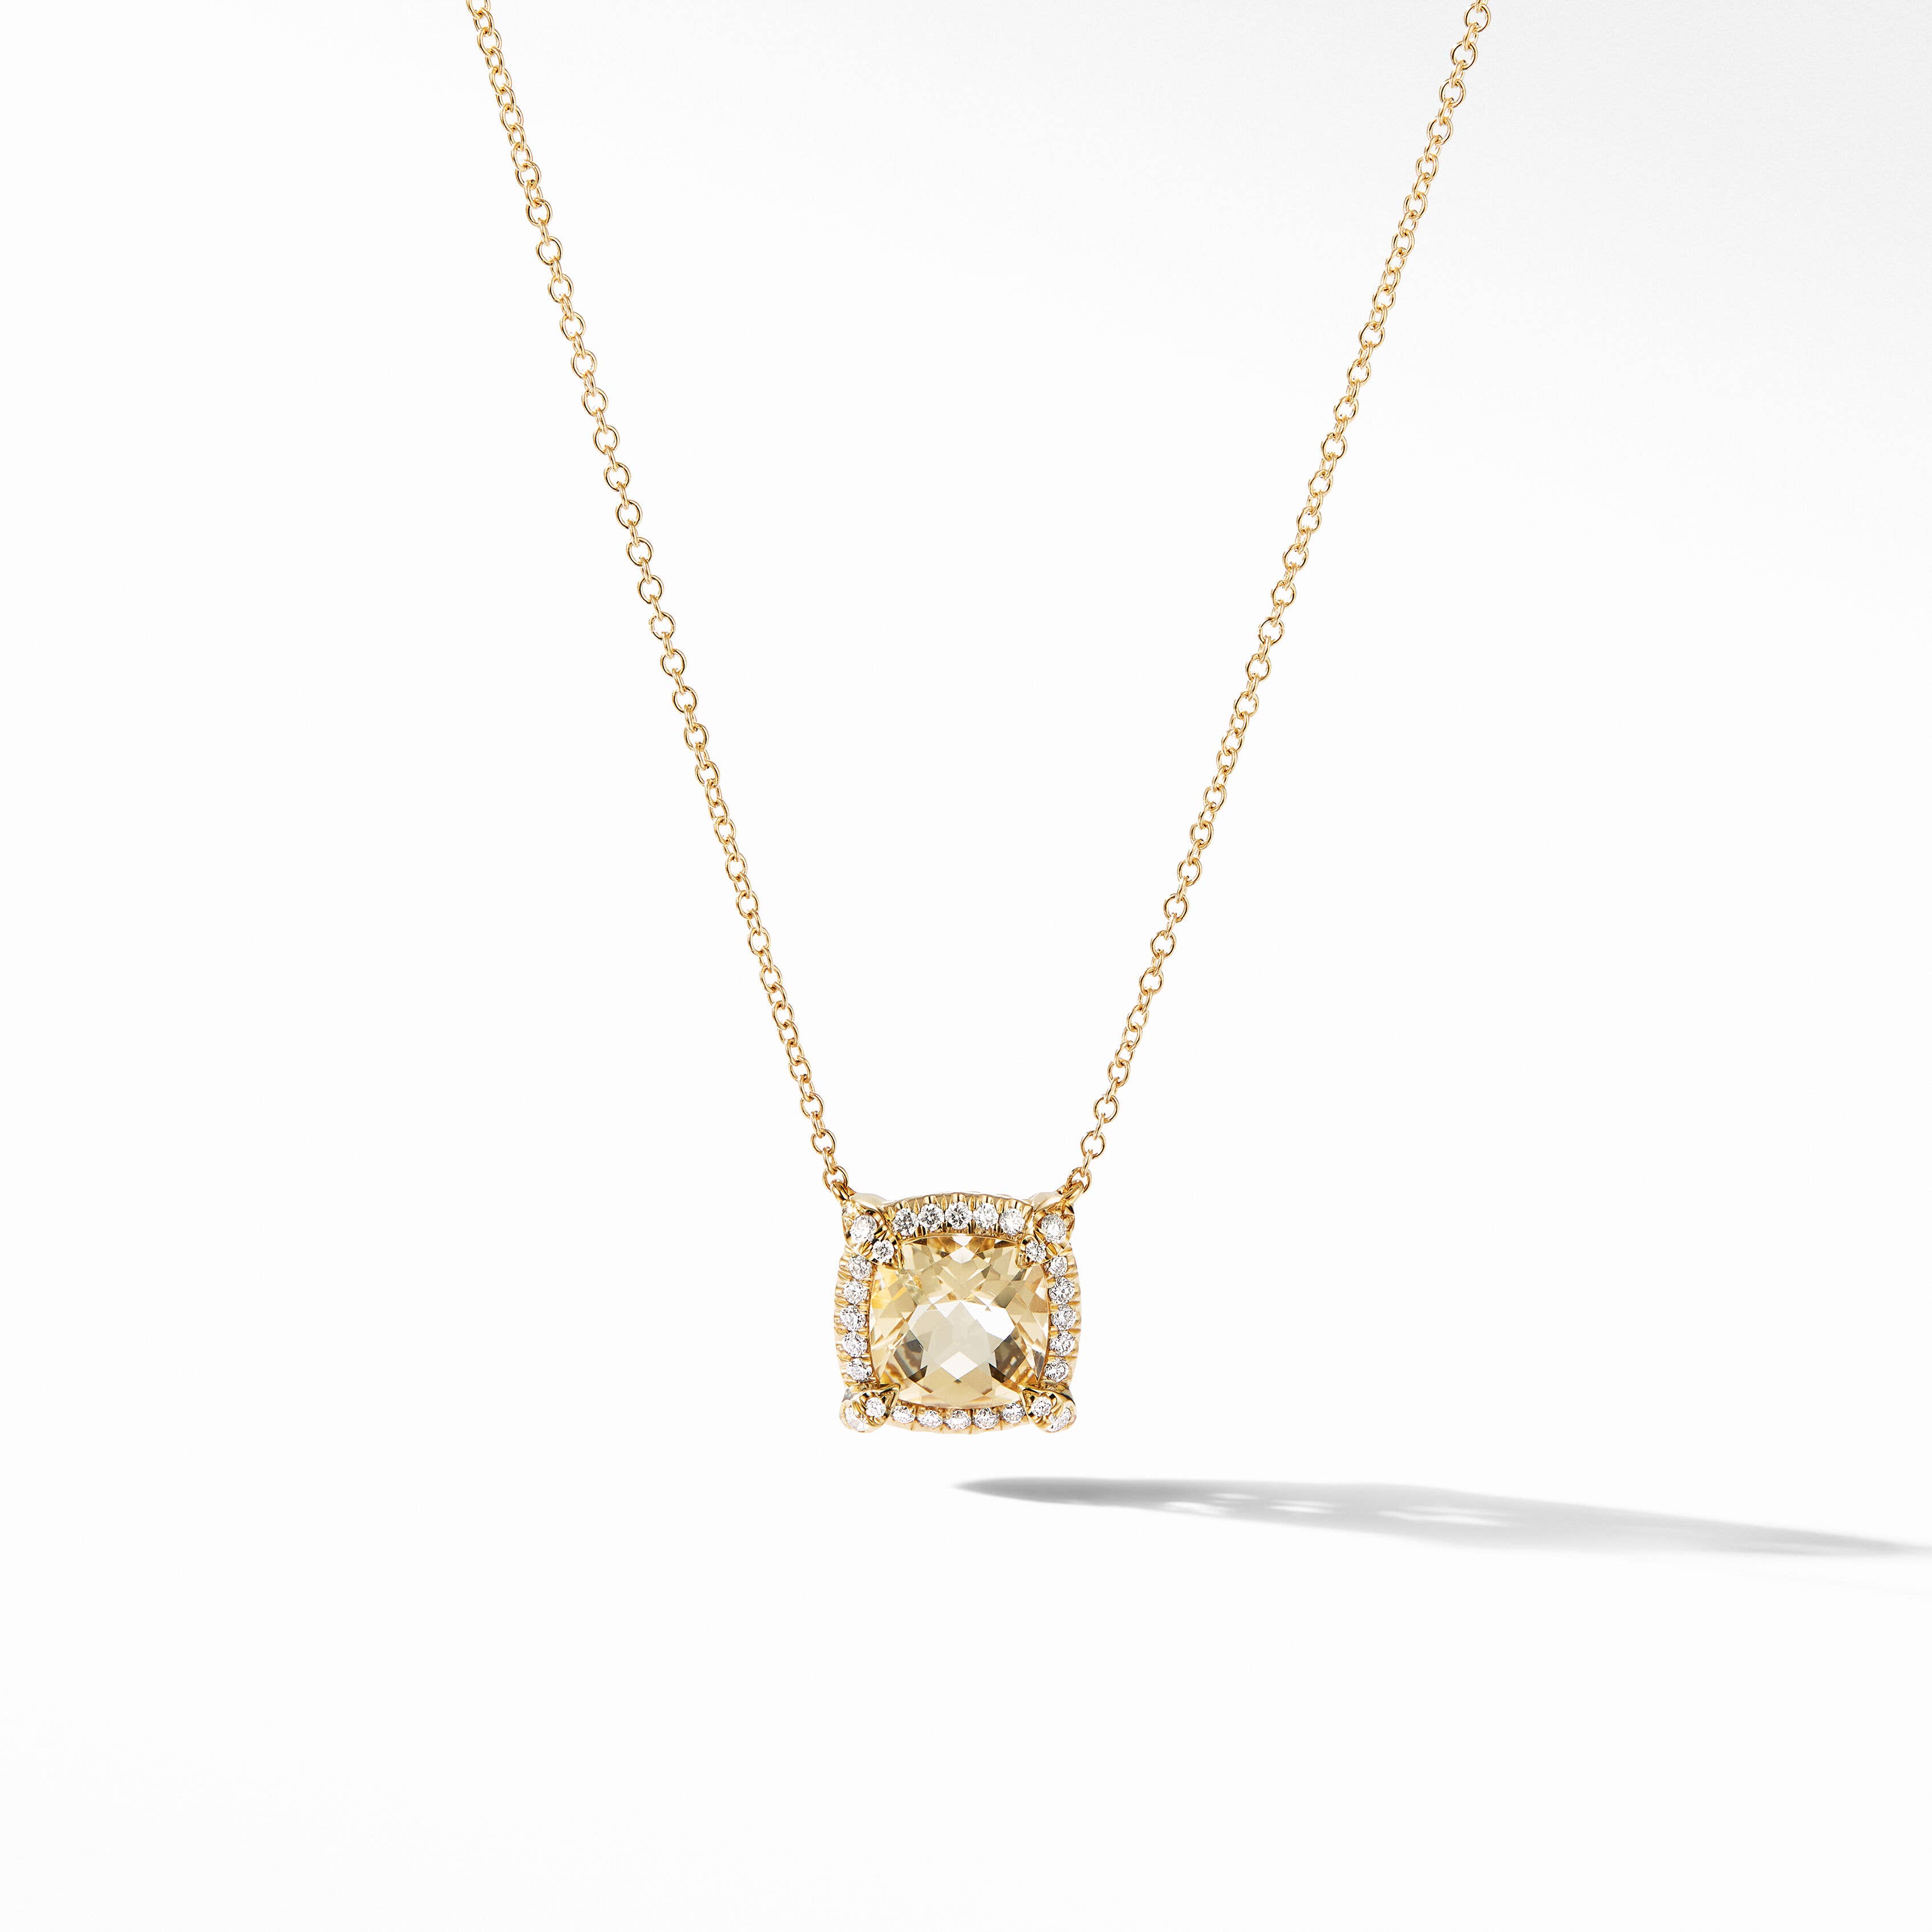 Petite Chatelaine® Pavé Bezel Pendant Necklace in 18K Yellow Gold with Champagne Citrine and Diamonds